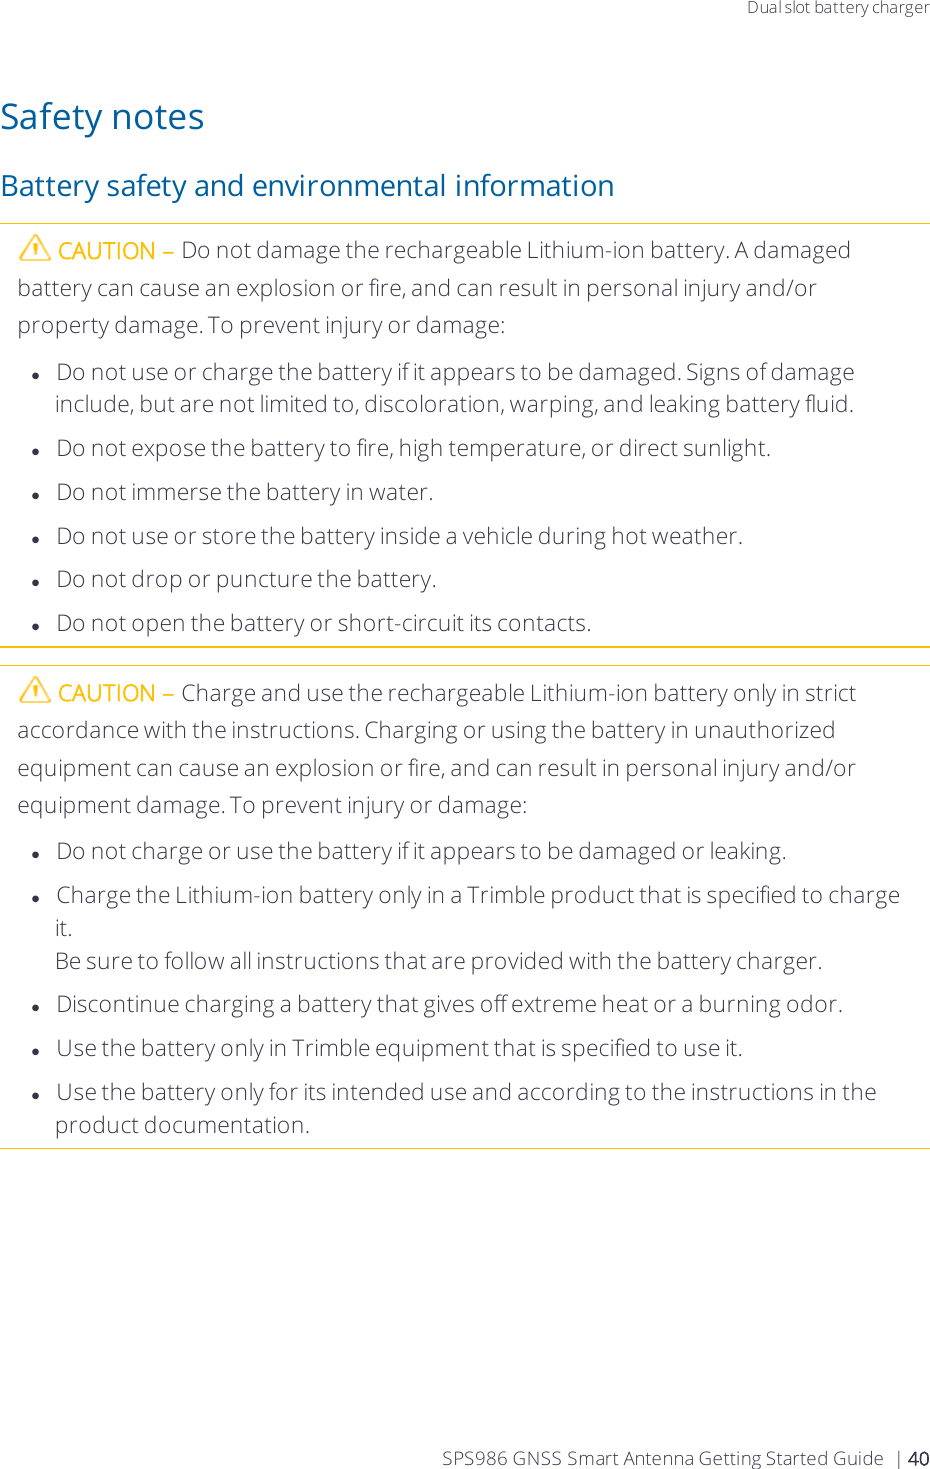 Dual slot battery chargerSafety notesBattery safety and environmental informationCAUTION – Do not damage the rechargeable Lithium-ion battery. A damaged battery can cause an explosion or fire, and can result in personal injury and/or property damage. To prevent injury or damage:lDo not use or charge the battery if it appears to be damaged. Signs of damage include, but are not limited to, discoloration, warping, and leaking battery fluid.lDo not expose the battery to fire, high temperature, or direct sunlight.lDo not immerse the battery in water.lDo not use or store the battery inside a vehicle during hot weather.lDo not drop or puncture the battery.lDo not open the battery or short-circuit its contacts.CAUTION – Charge and use the rechargeable Lithium-ion battery only in strict accordance with the instructions. Charging or using the battery in unauthorized equipment can cause an explosion or fire, and can result in personal injury and/or equipment damage. To prevent injury or damage:lDo not charge or use the battery if it appears to be damaged or leaking.lCharge the Lithium-ion battery only in a Trimble product that is specified to charge it. Be sure to follow all instructions that are provided with the battery charger.lDiscontinue charging a battery that gives off extreme heat or a burning odor.lUse the battery only in Trimble equipment that is specified to use it.lUse the battery only for its intended use and according to the instructions in the product documentation.SPS986 GNSS Smart Antenna Getting Started Guide | 40